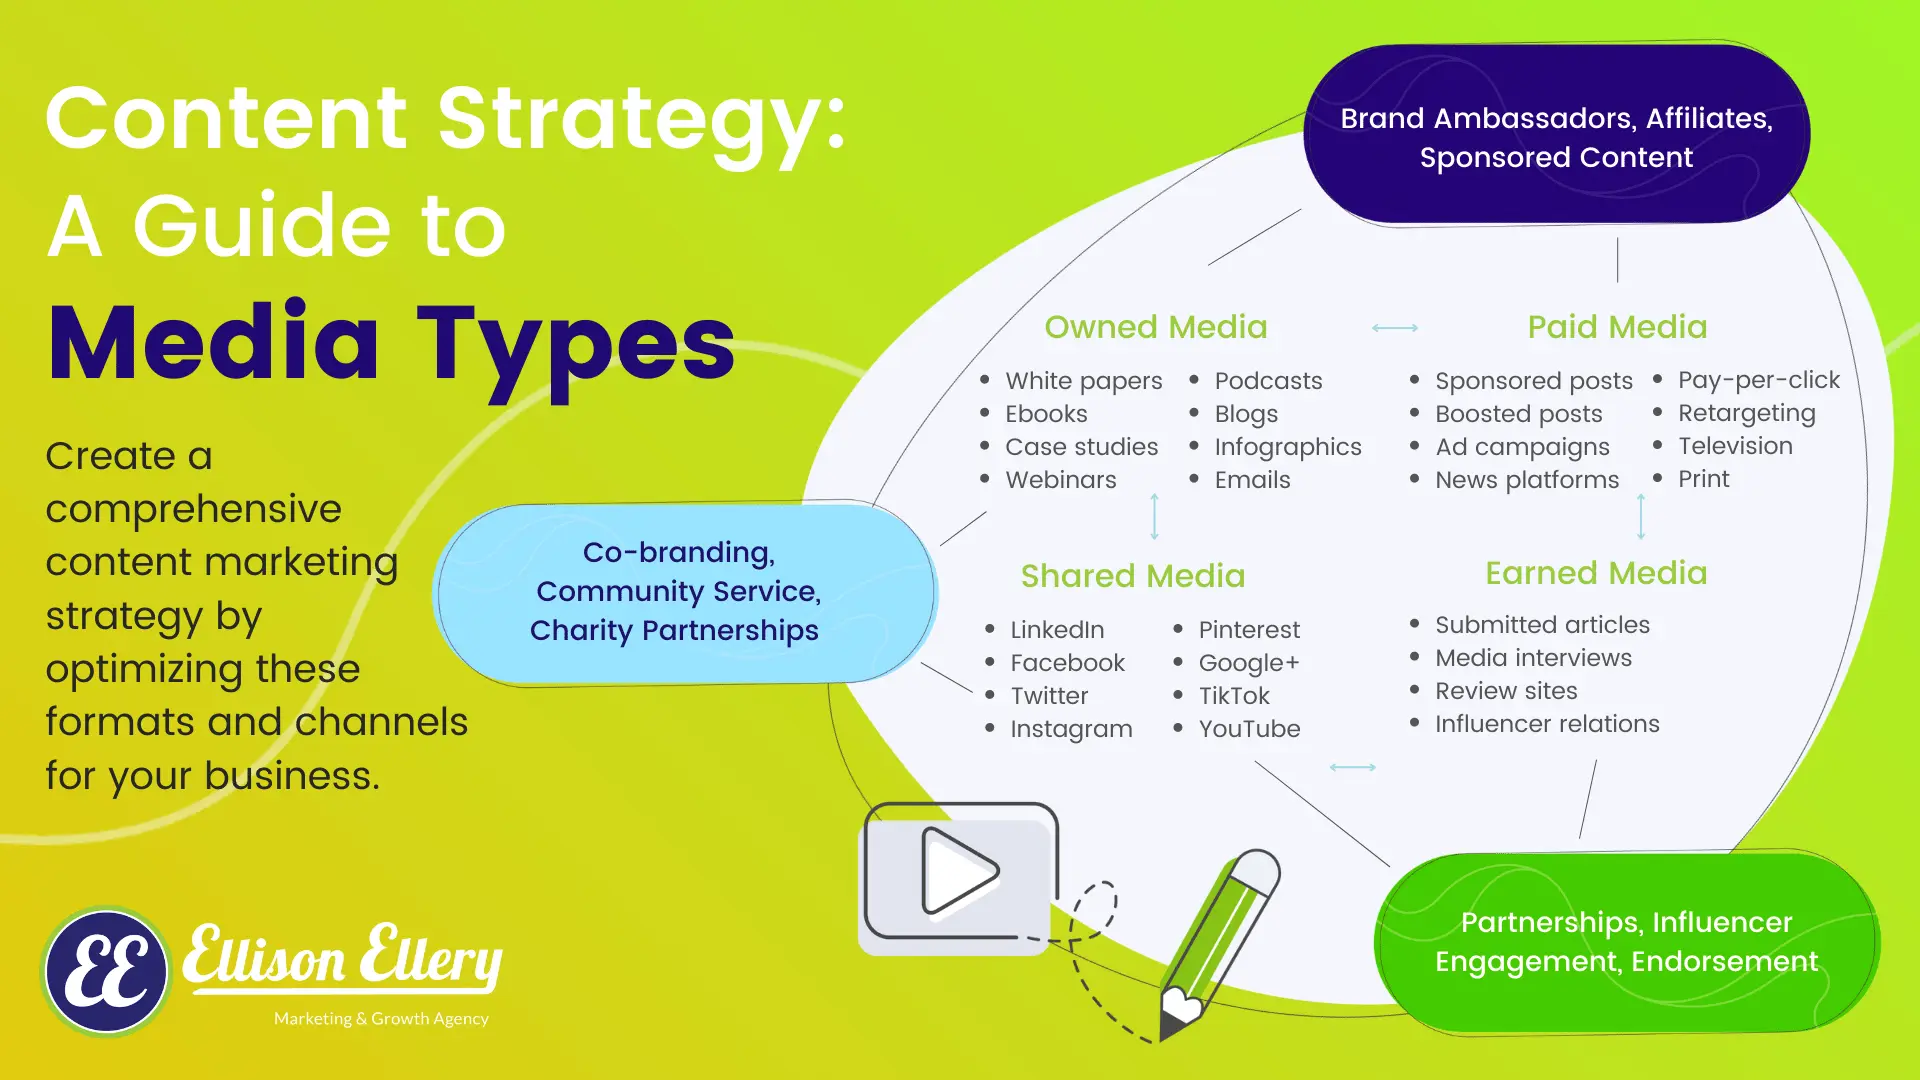 Content Strategy: Guide to Media Types